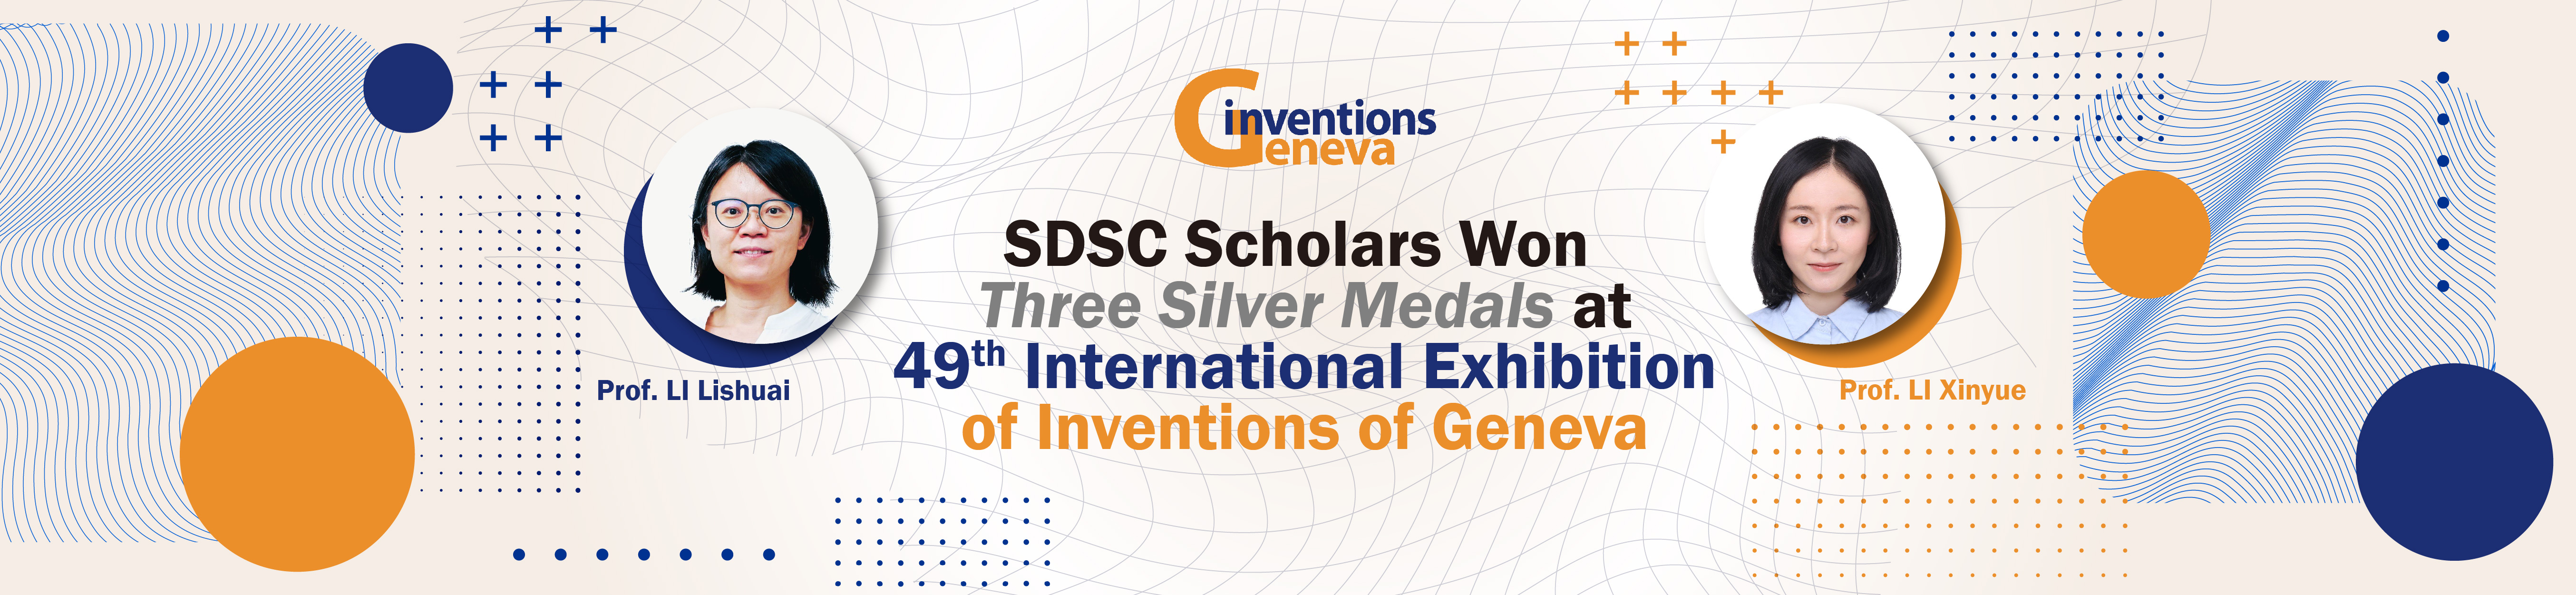 SDSC Scholars Won Three Silver Medals at 49th International Exhibition of Inventions of Geneva 